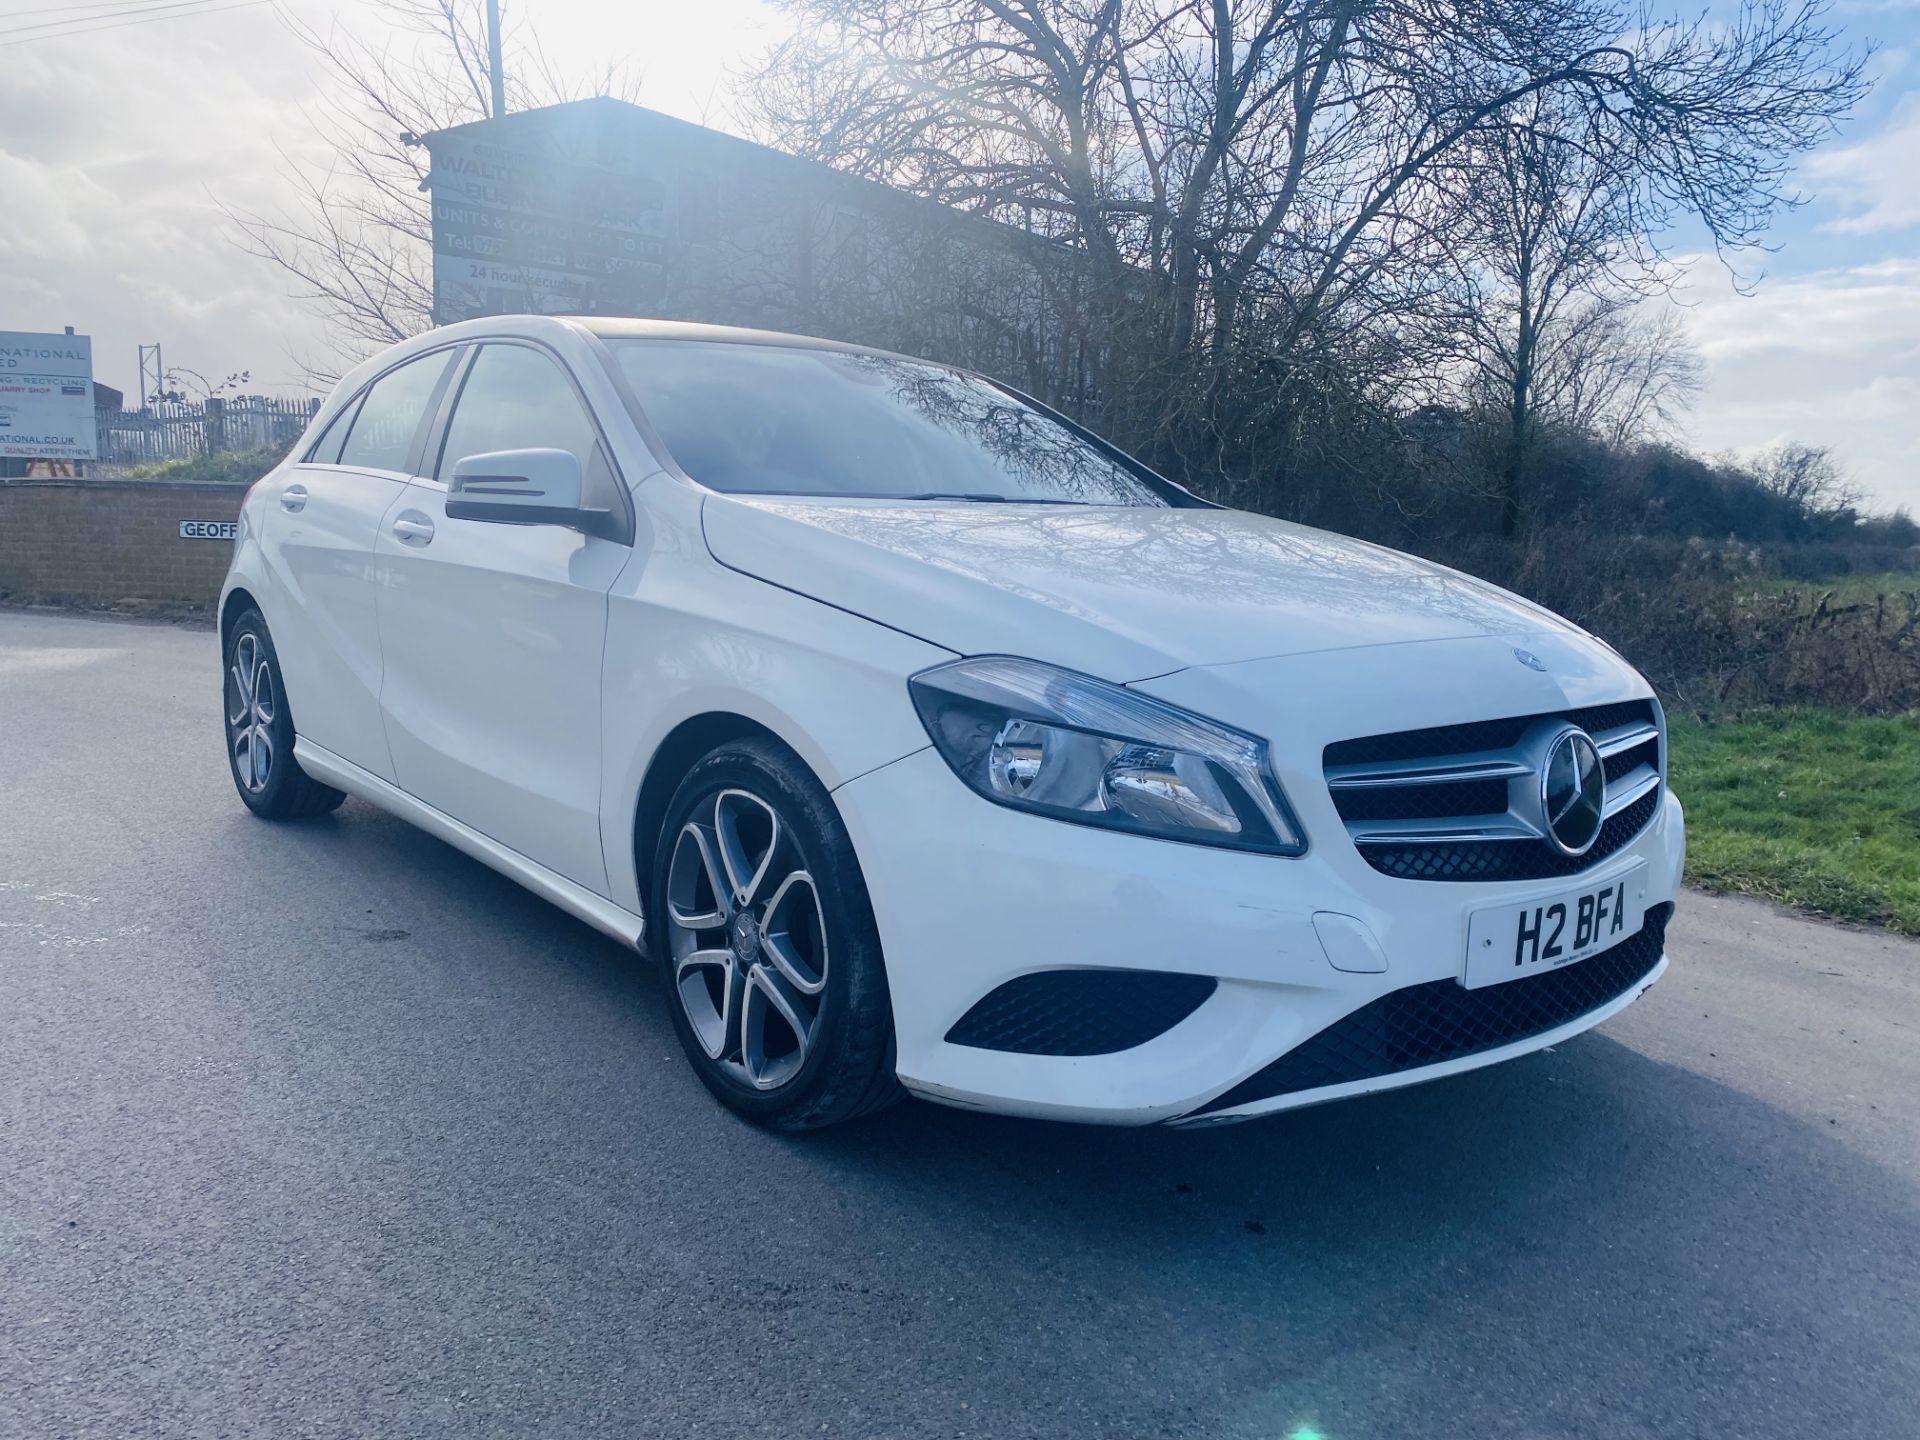 (ON SALE) MERCEDES A180d "SPORT" (13 REG) PRIVATE PLATE INCLUDED - AIR CON - ALLOYS (NO VAT) - Image 3 of 22